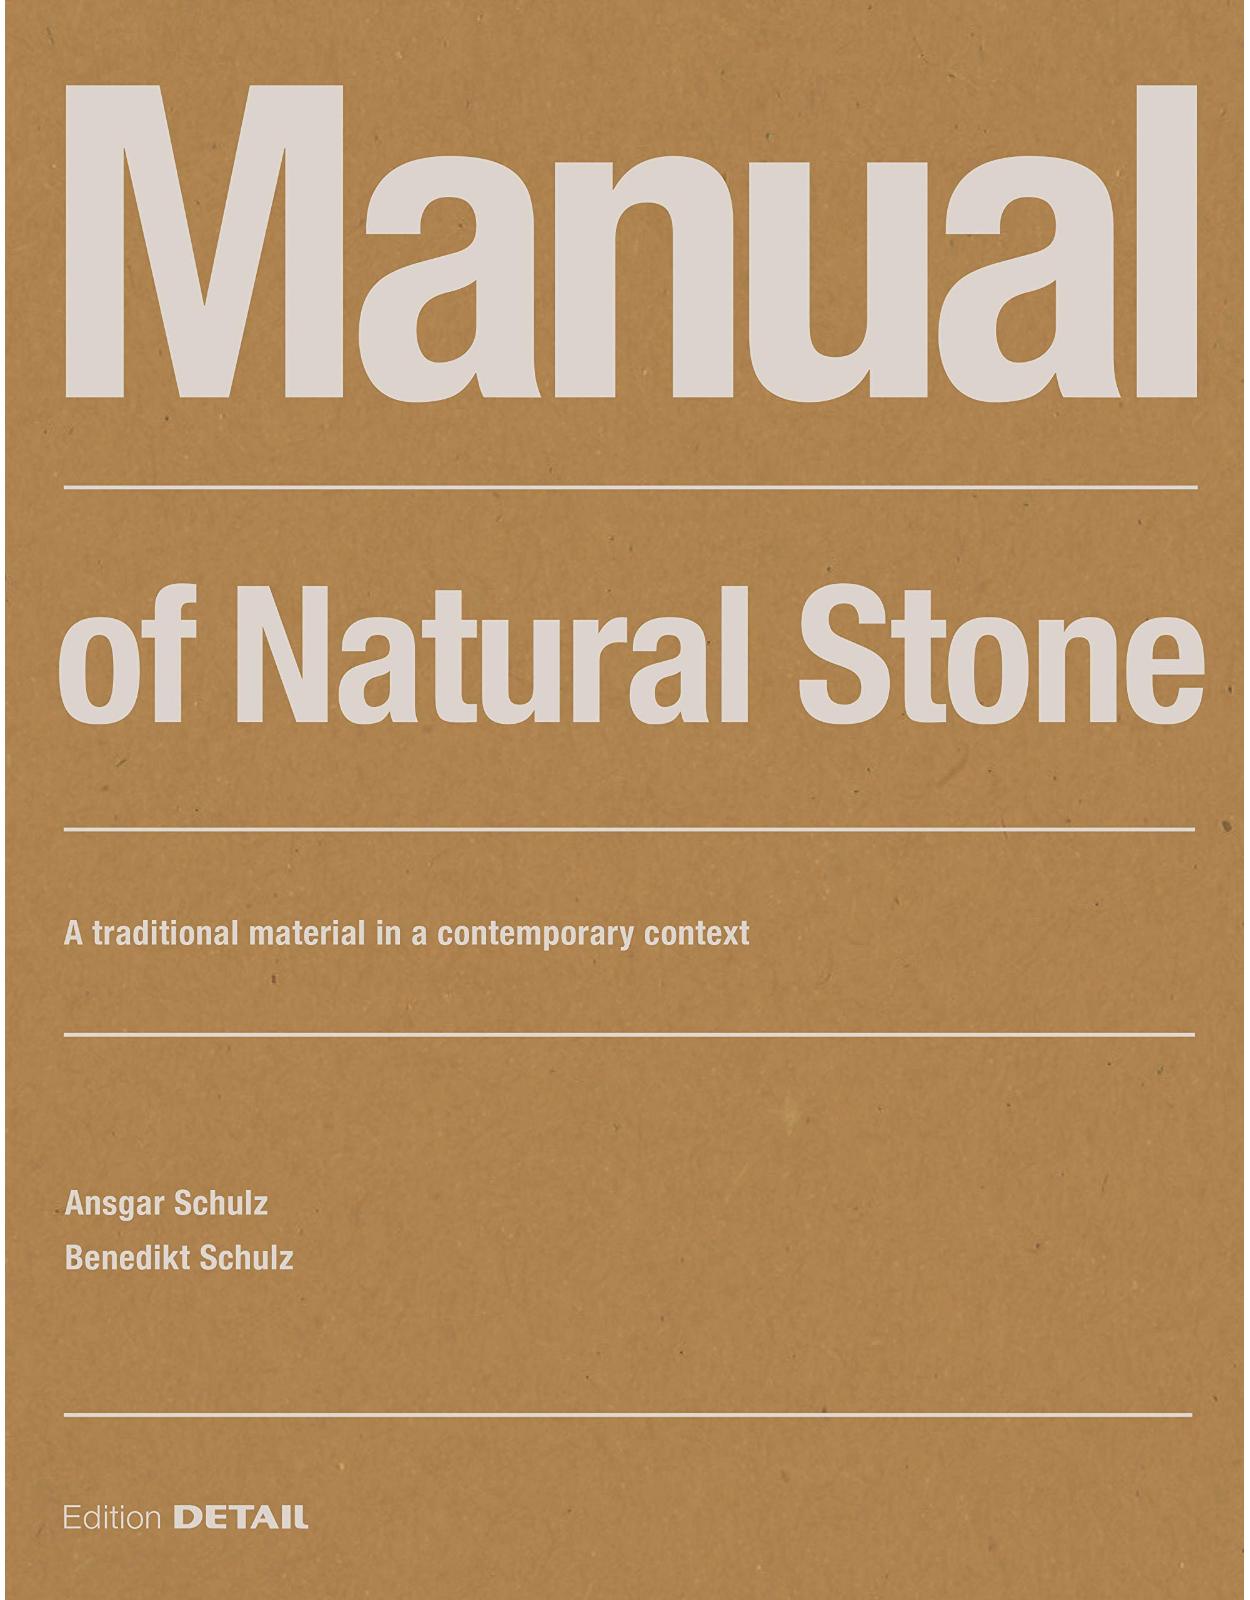 Manual of Natural Stone: A traditional material in a contemporary context (DETAIL Construction Manuals) 